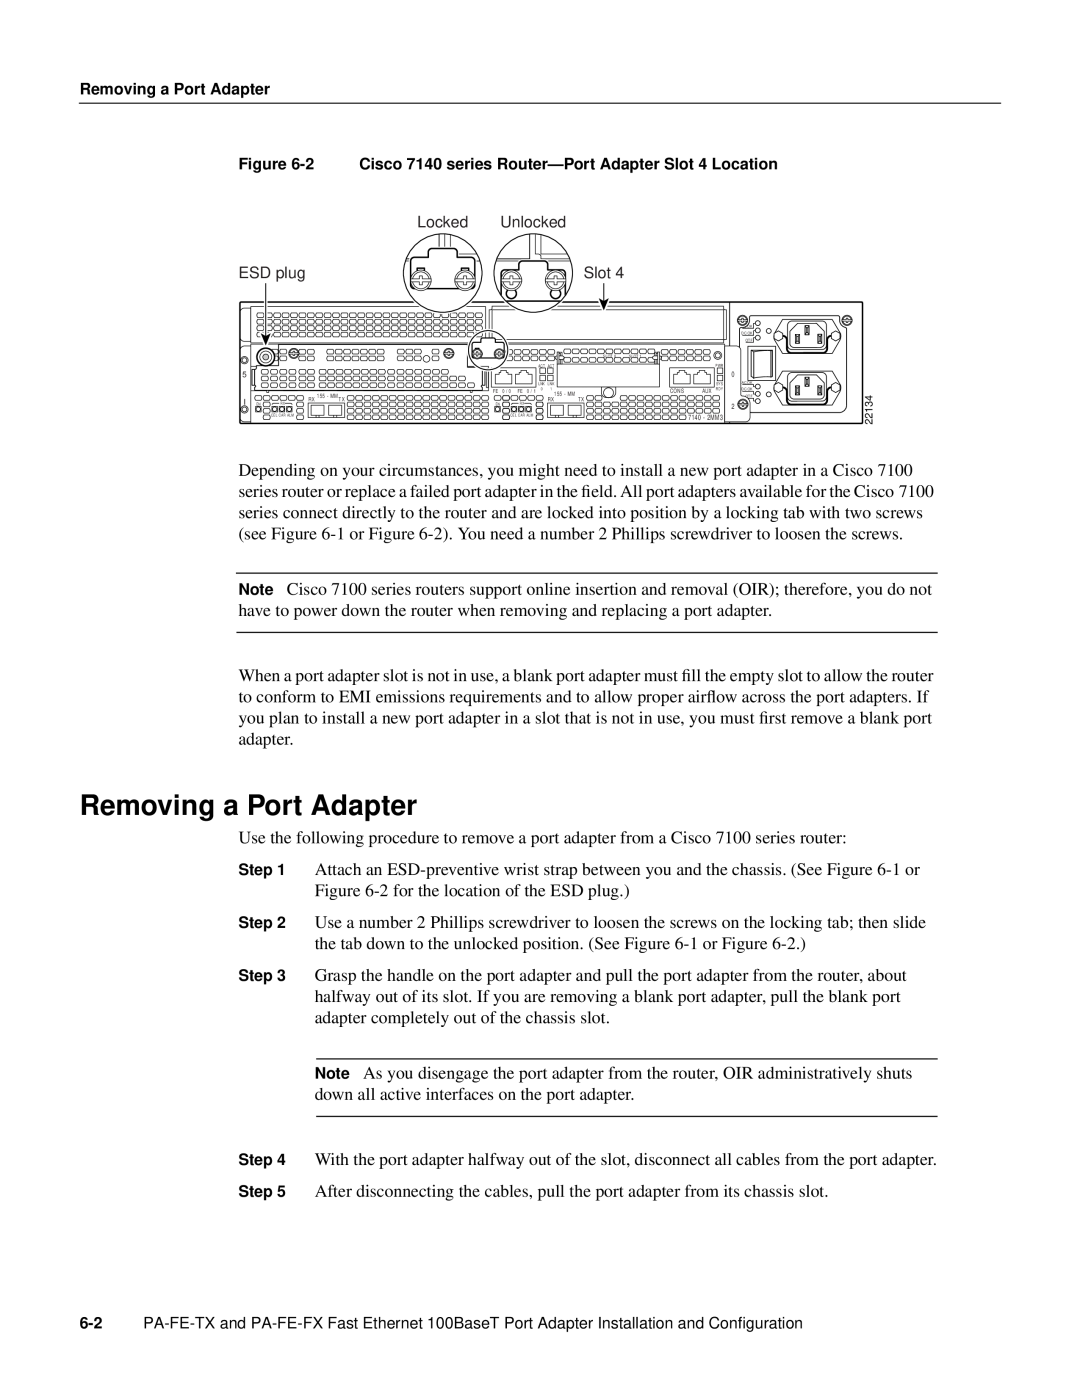 Cisco Systems PA-FE-TX, PA-FE-FX manual Removing a Port Adapter 